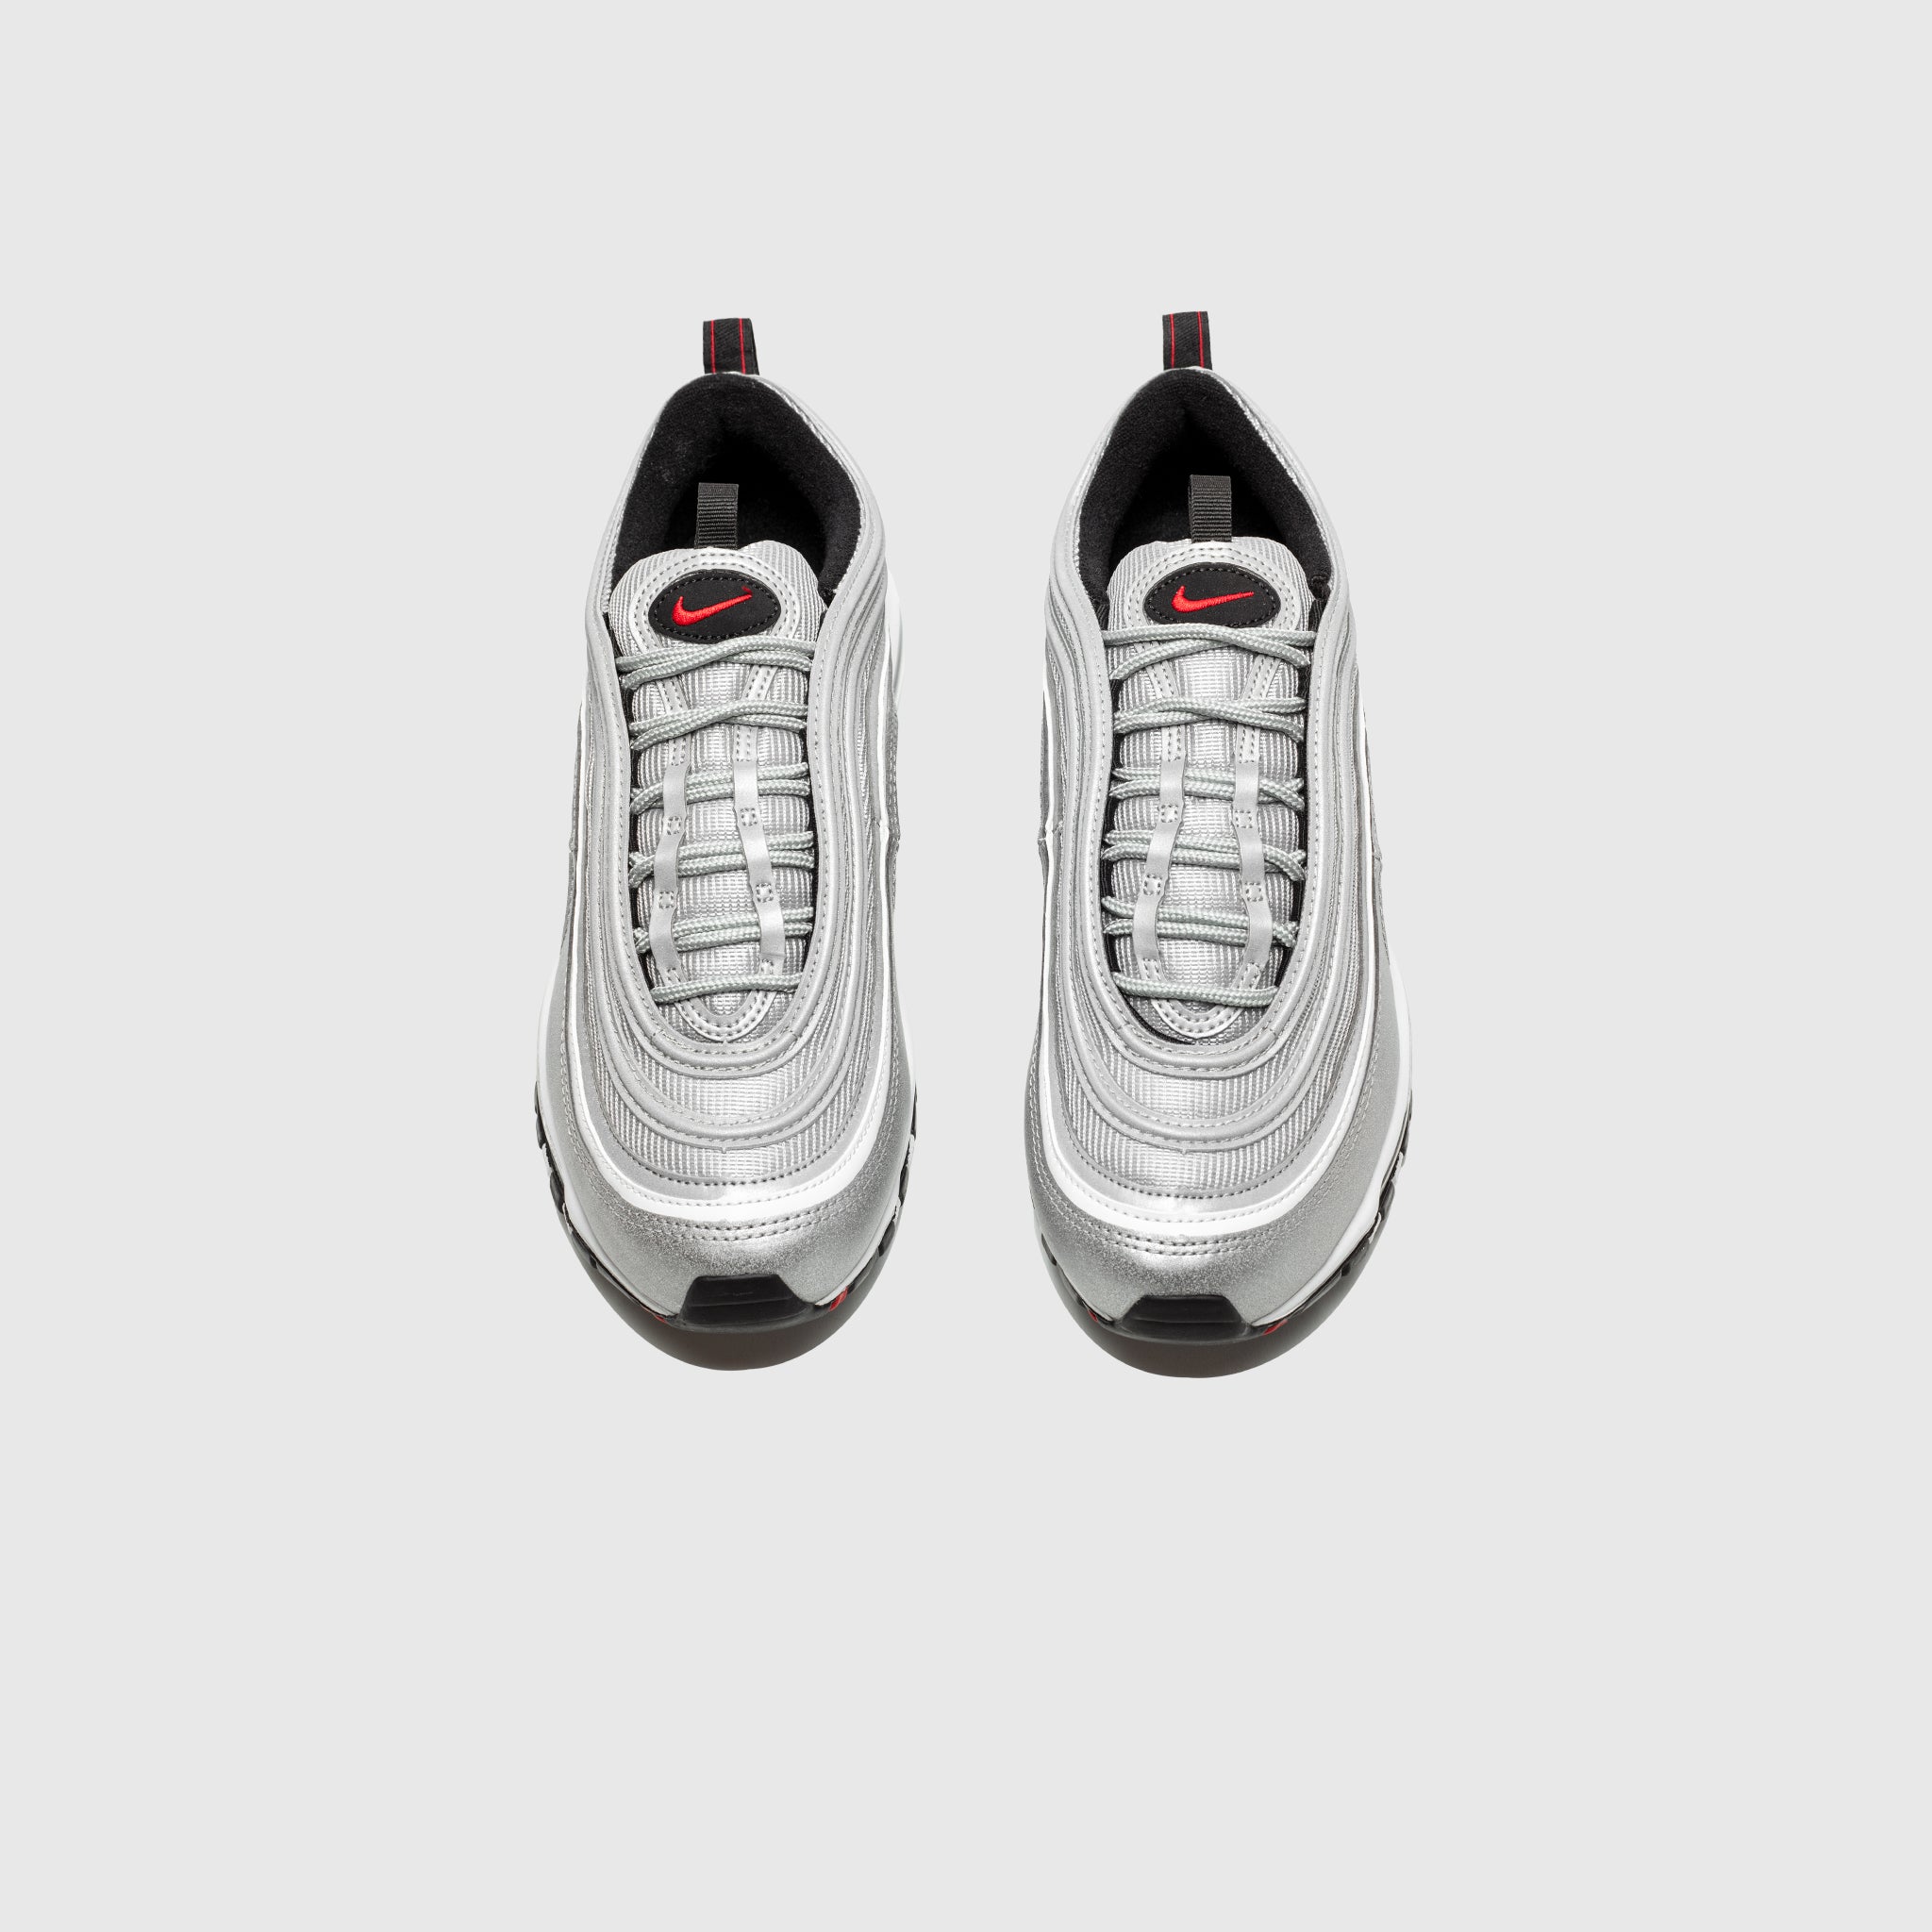 MAX "SILVER BULLET" – PACKER SHOES